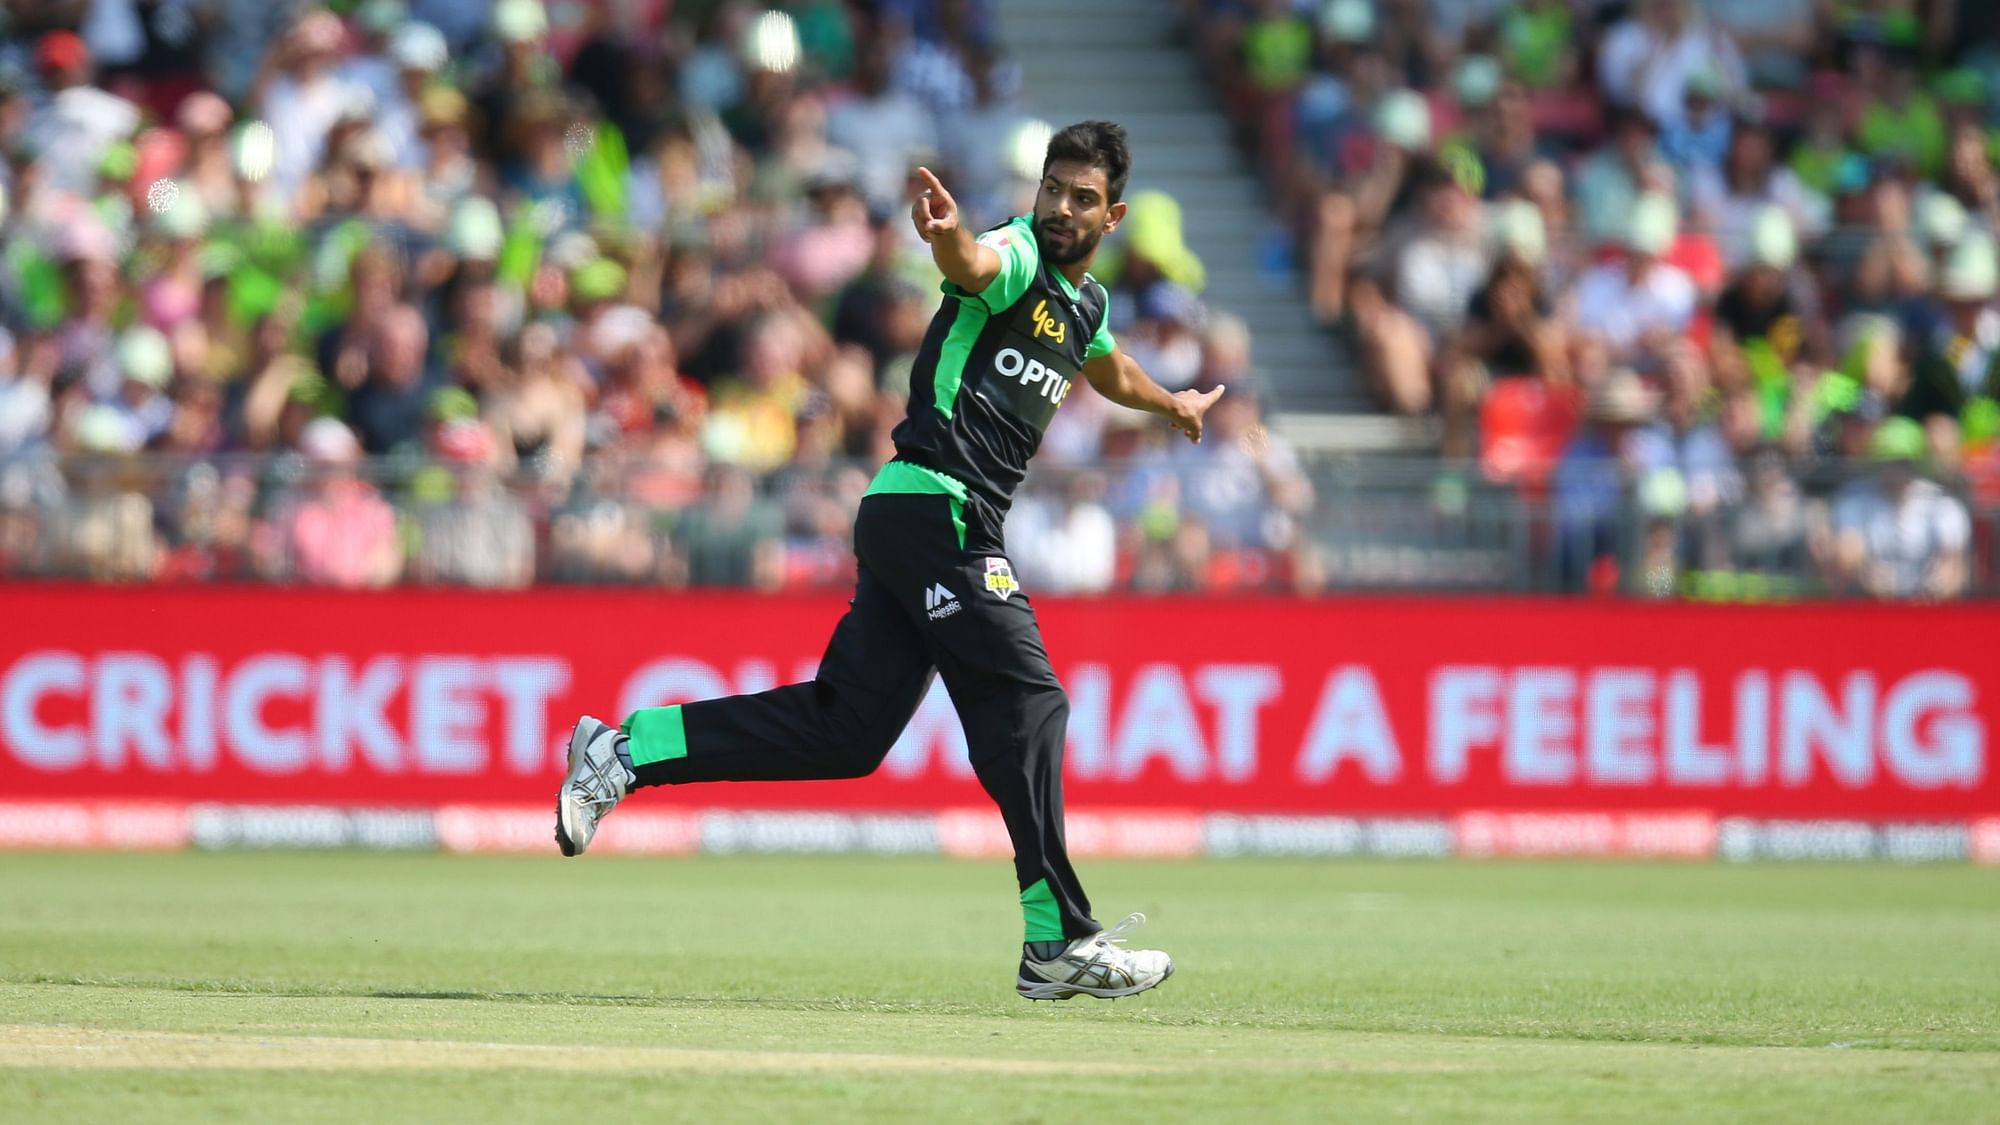 Pakistani pacer Haris Rauf drew flak on Thursday, 2 January for his aggressive celebration after taking a wicket while playing for Melbourne Stars in the ongoing Big Bash League (BBL) in Australia.